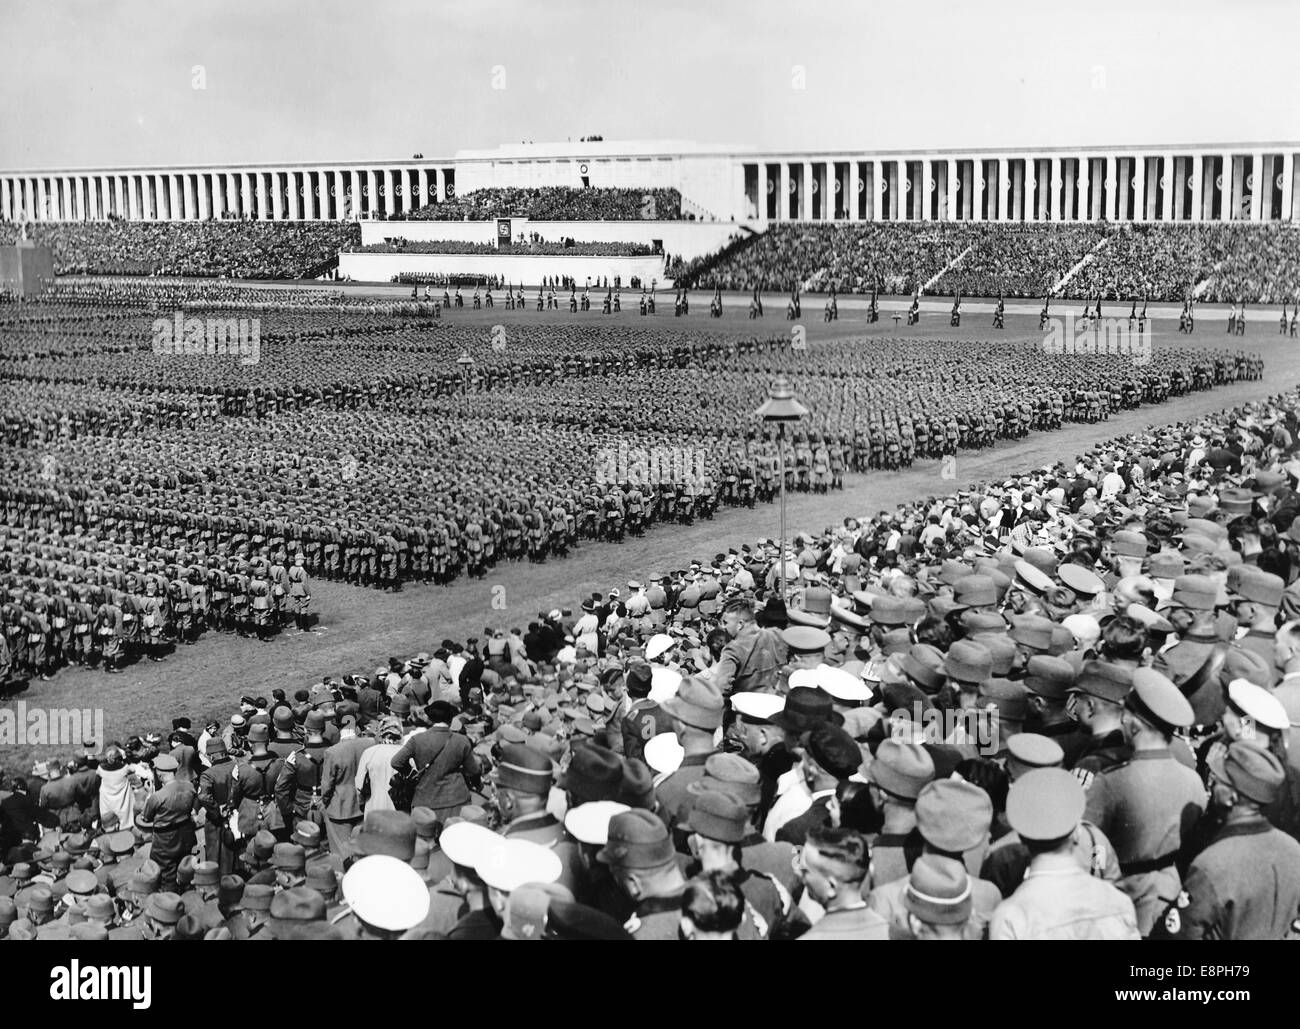 Nuremberg Rally 1936 in Nuremberg, Germany - Roll call of the Reich labour Service (RAD) in front of the grandstand on Zeppelin Field at the Nazi party rally grounds. (Flaws in quality due to the historic picture copy) Fotoarchiv für Zeitgeschichtee - NO WIRE SERVICE - Stock Photo